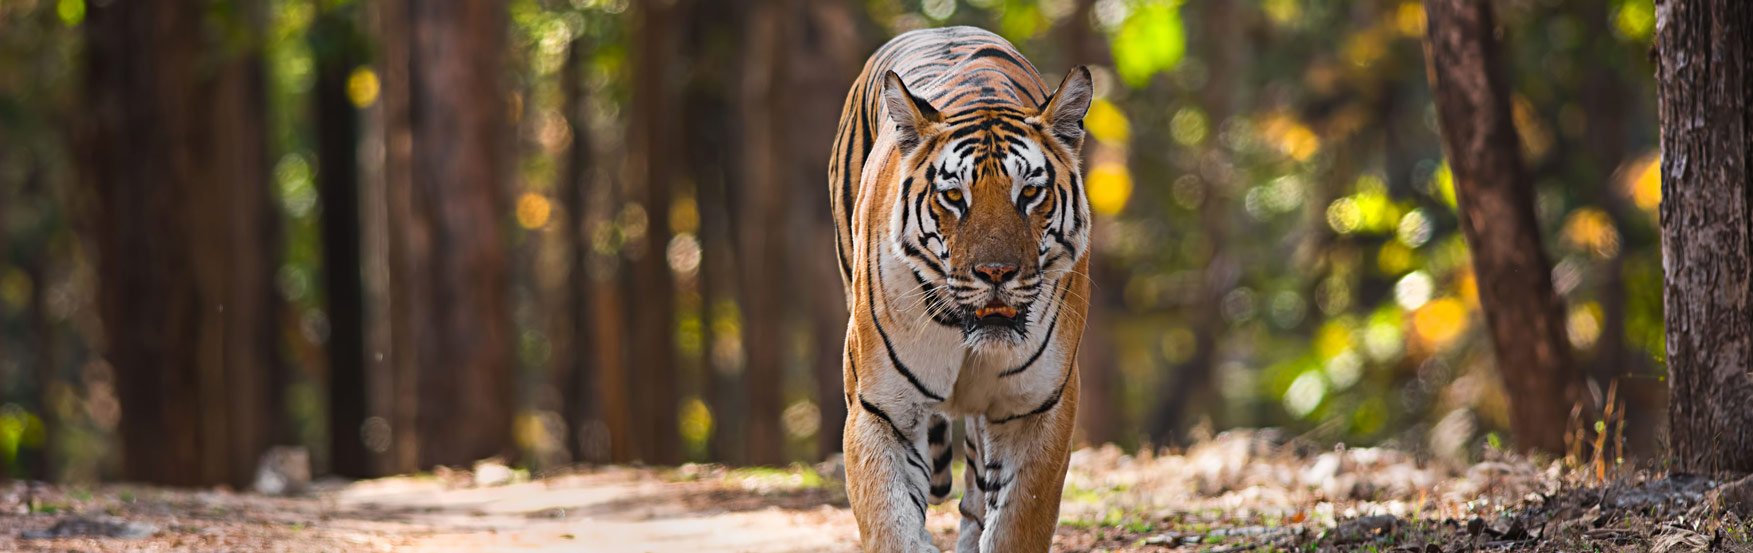 Information About Pench National Park Madhya Pradesh India